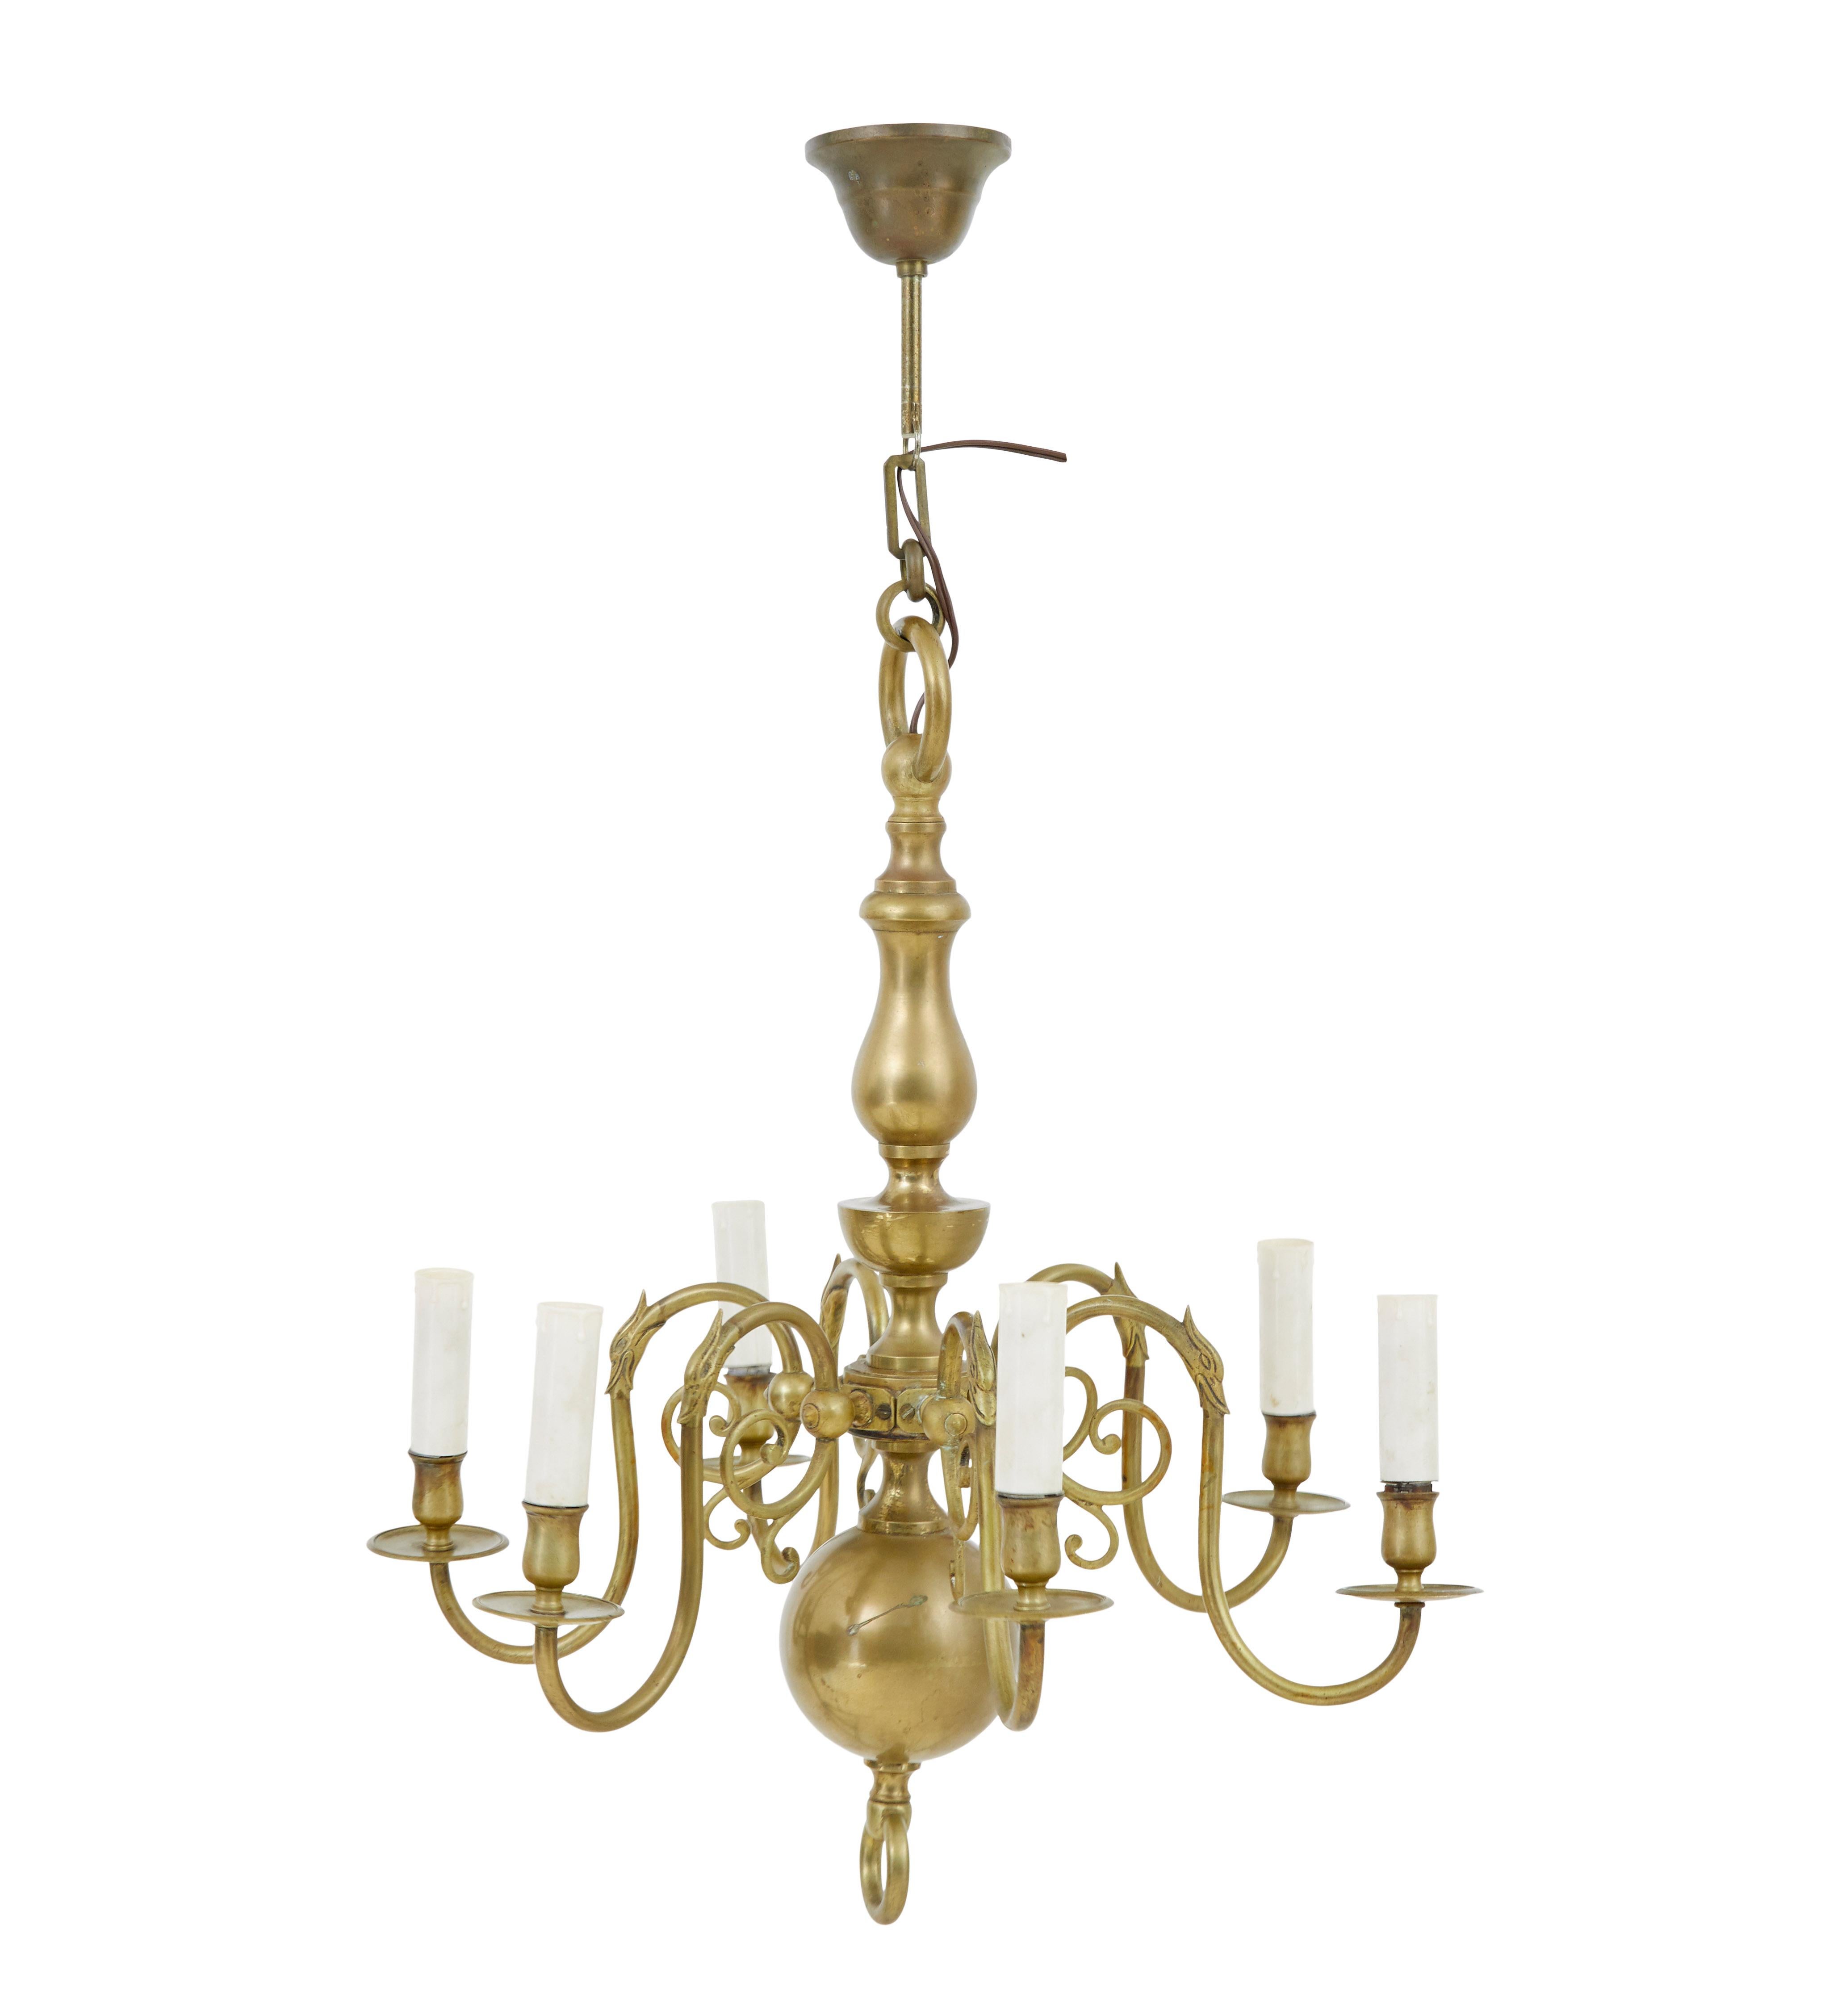 Early 20th century 6 arm brass chandelier circa 1910.

Functional light fitting that would be ideal for many rooms around the home.

Central stem with bulbous ball and hoop.  6 decorative arms which have been wired and covered with faux candle